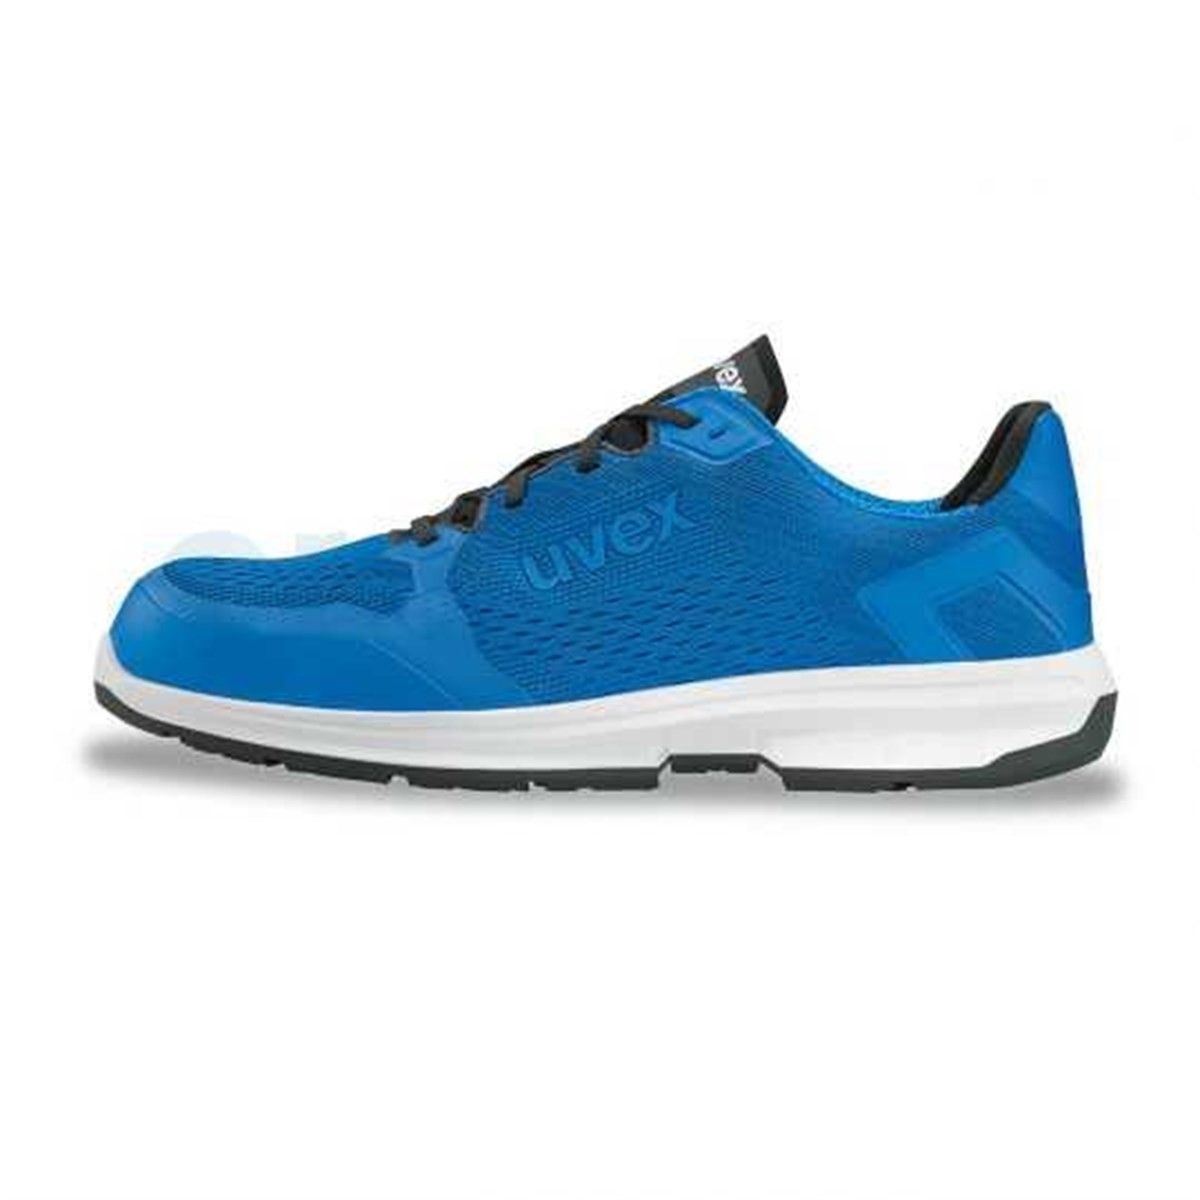 UVEX 6599 SPORT S1 SRC BLUE SPORTS ESD WORK SHOES